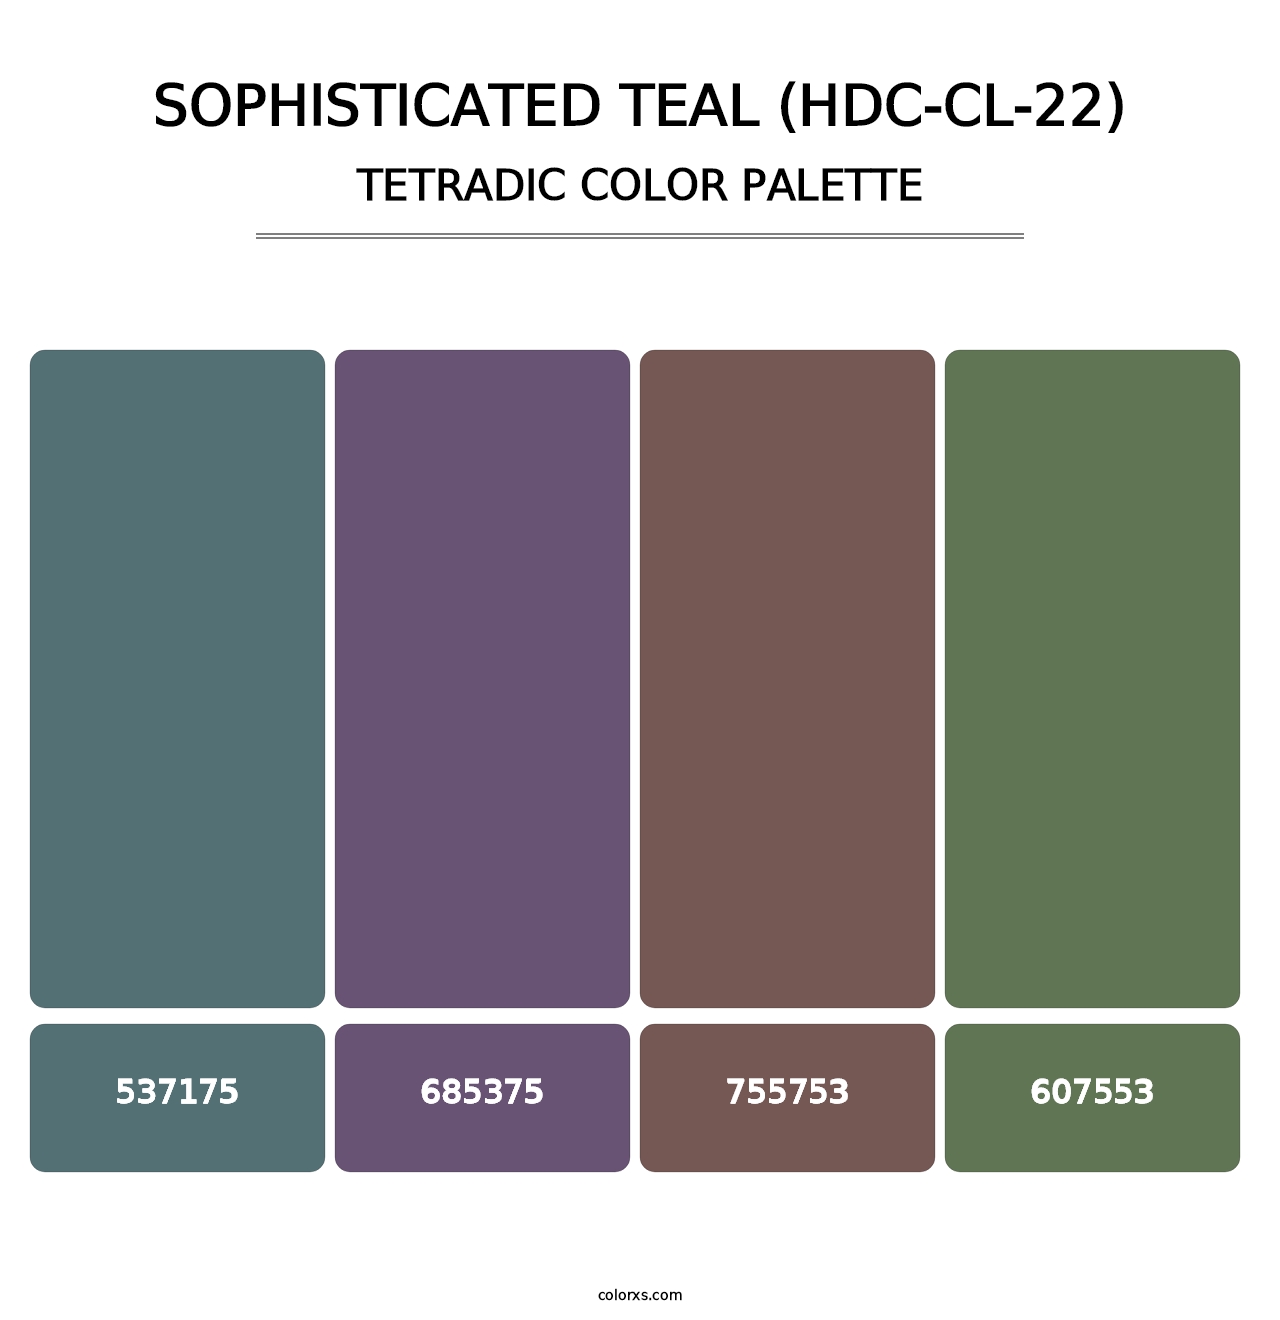 Sophisticated Teal (HDC-CL-22) - Tetradic Color Palette